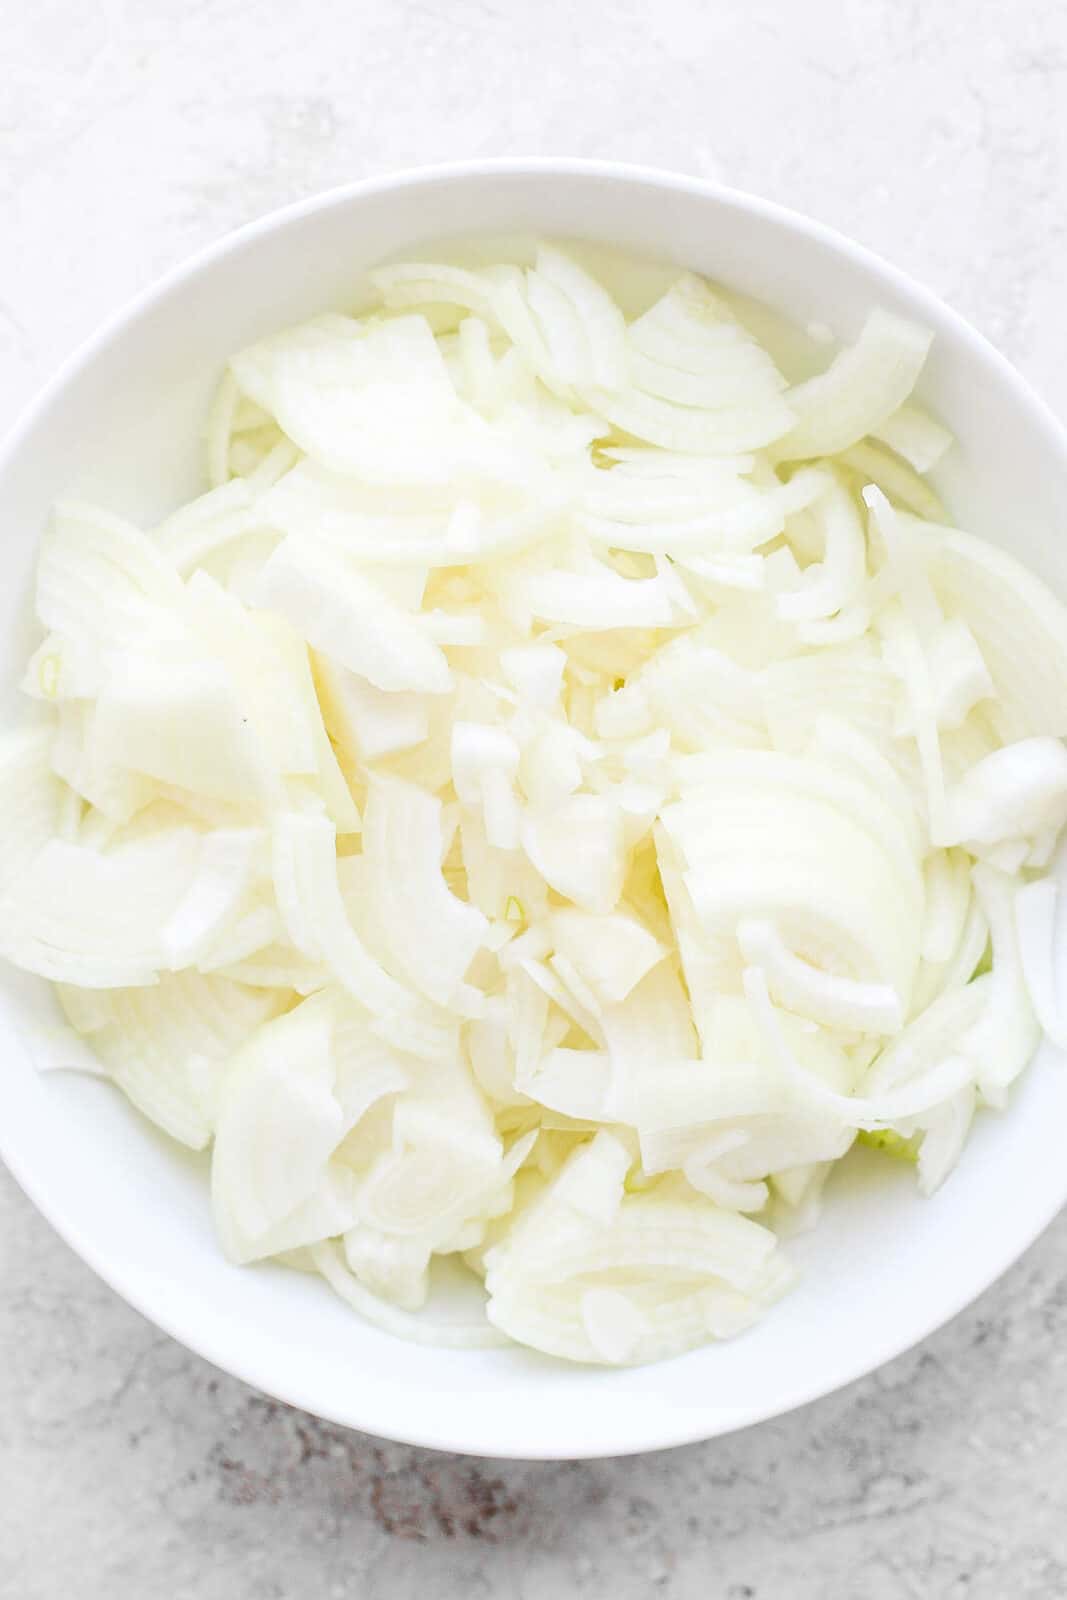 A large bowl of sliced onions.